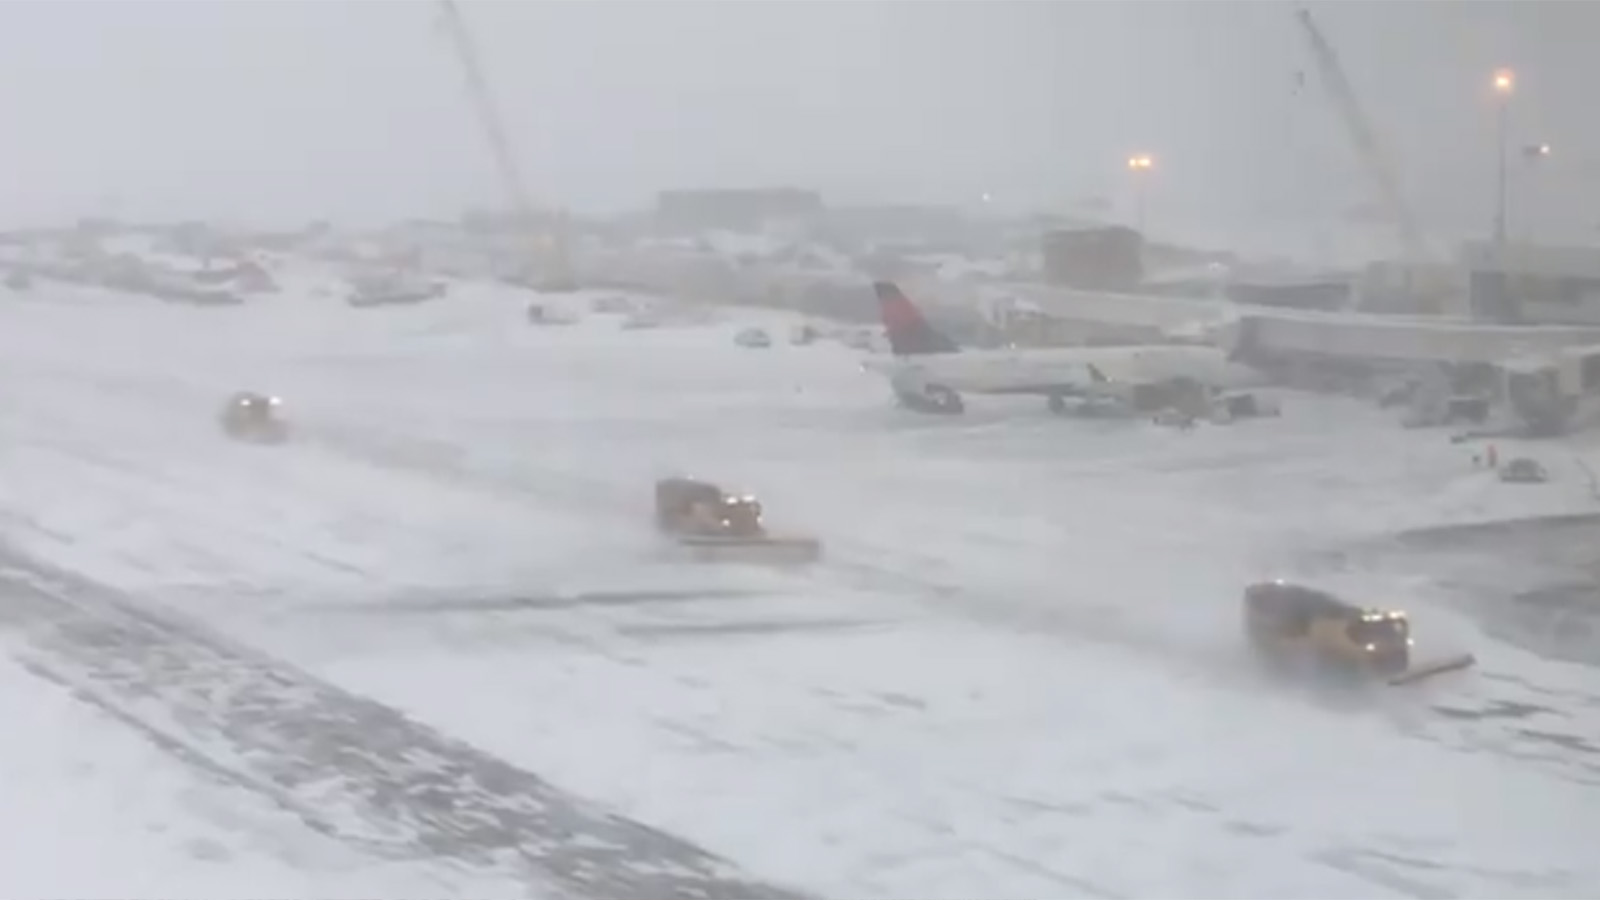 Snow clearing operations at Denver International Airport on Tuesday morning